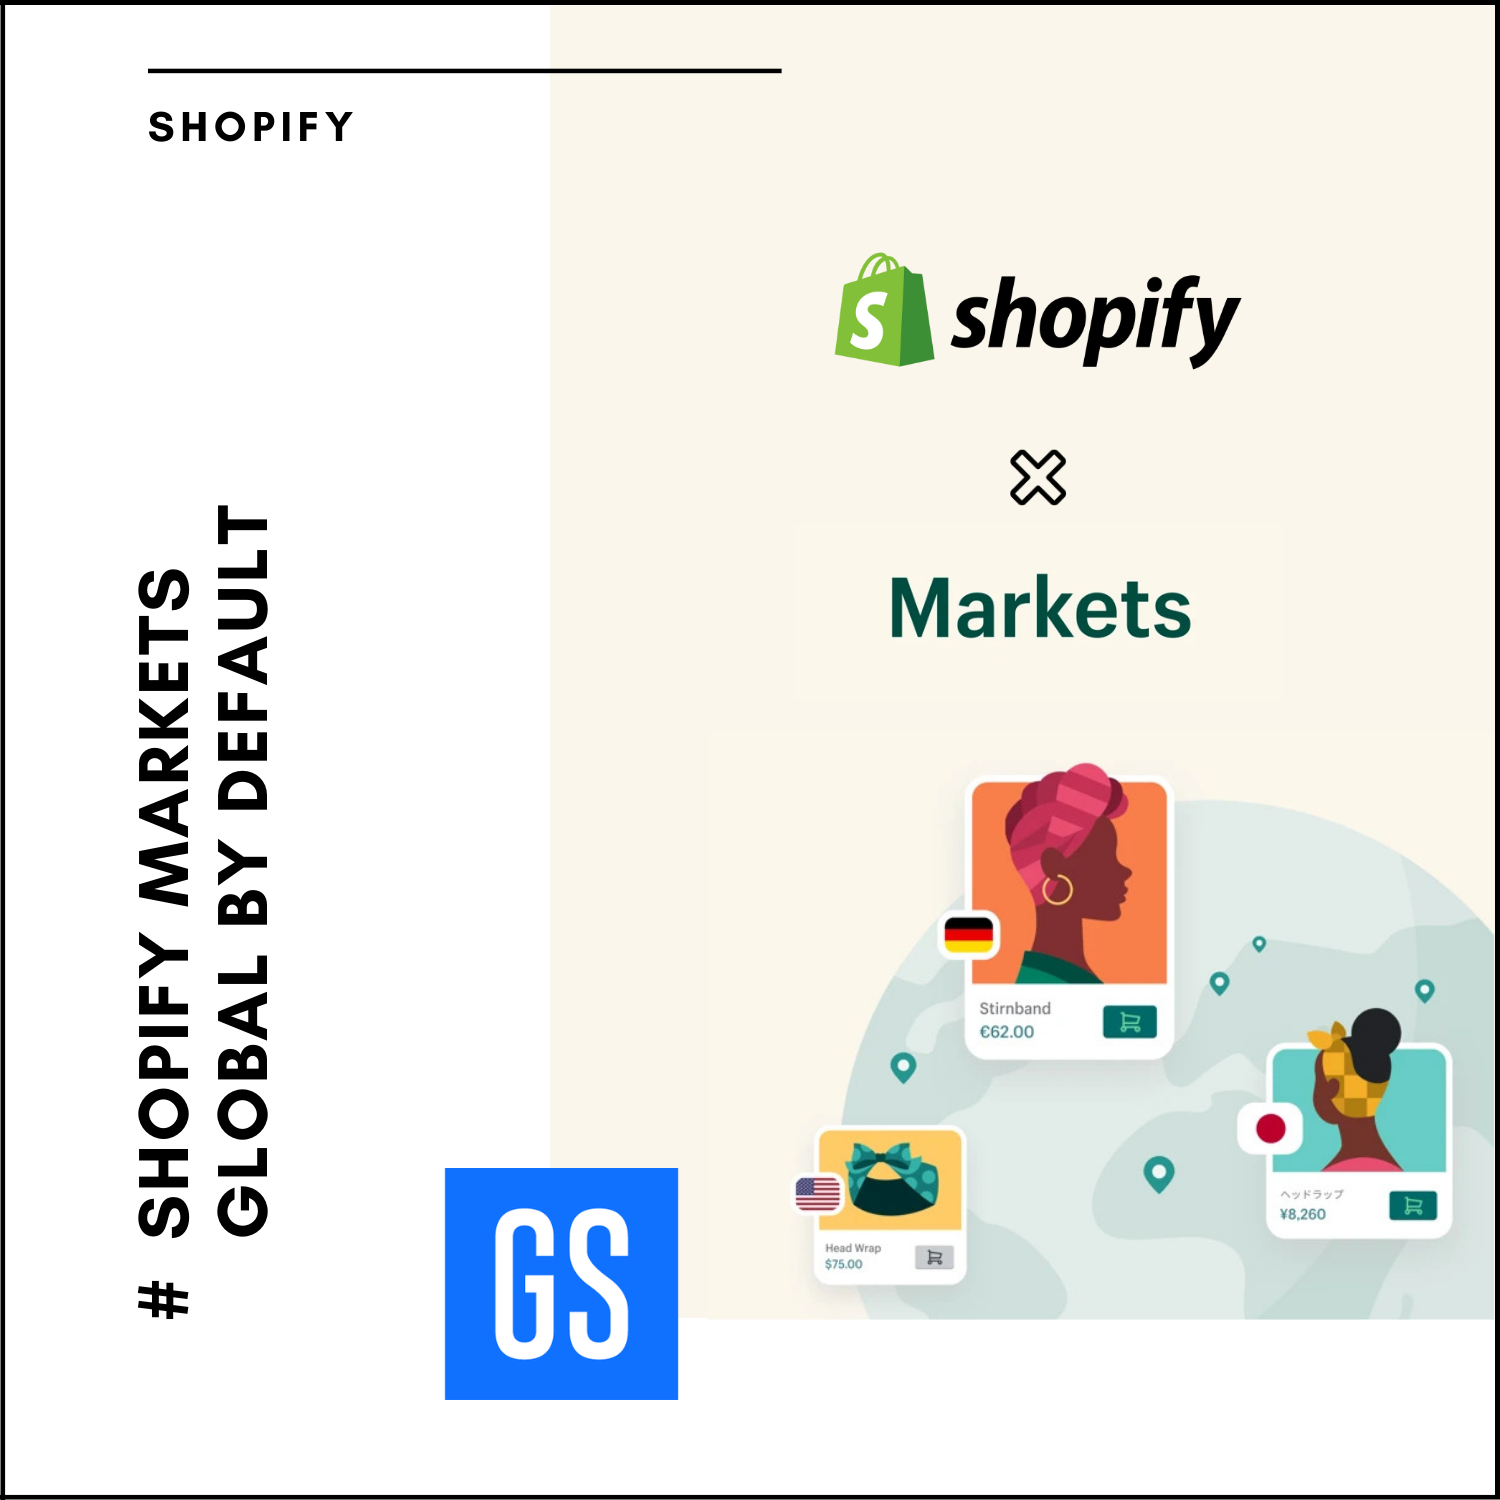 Shopify markets global by default